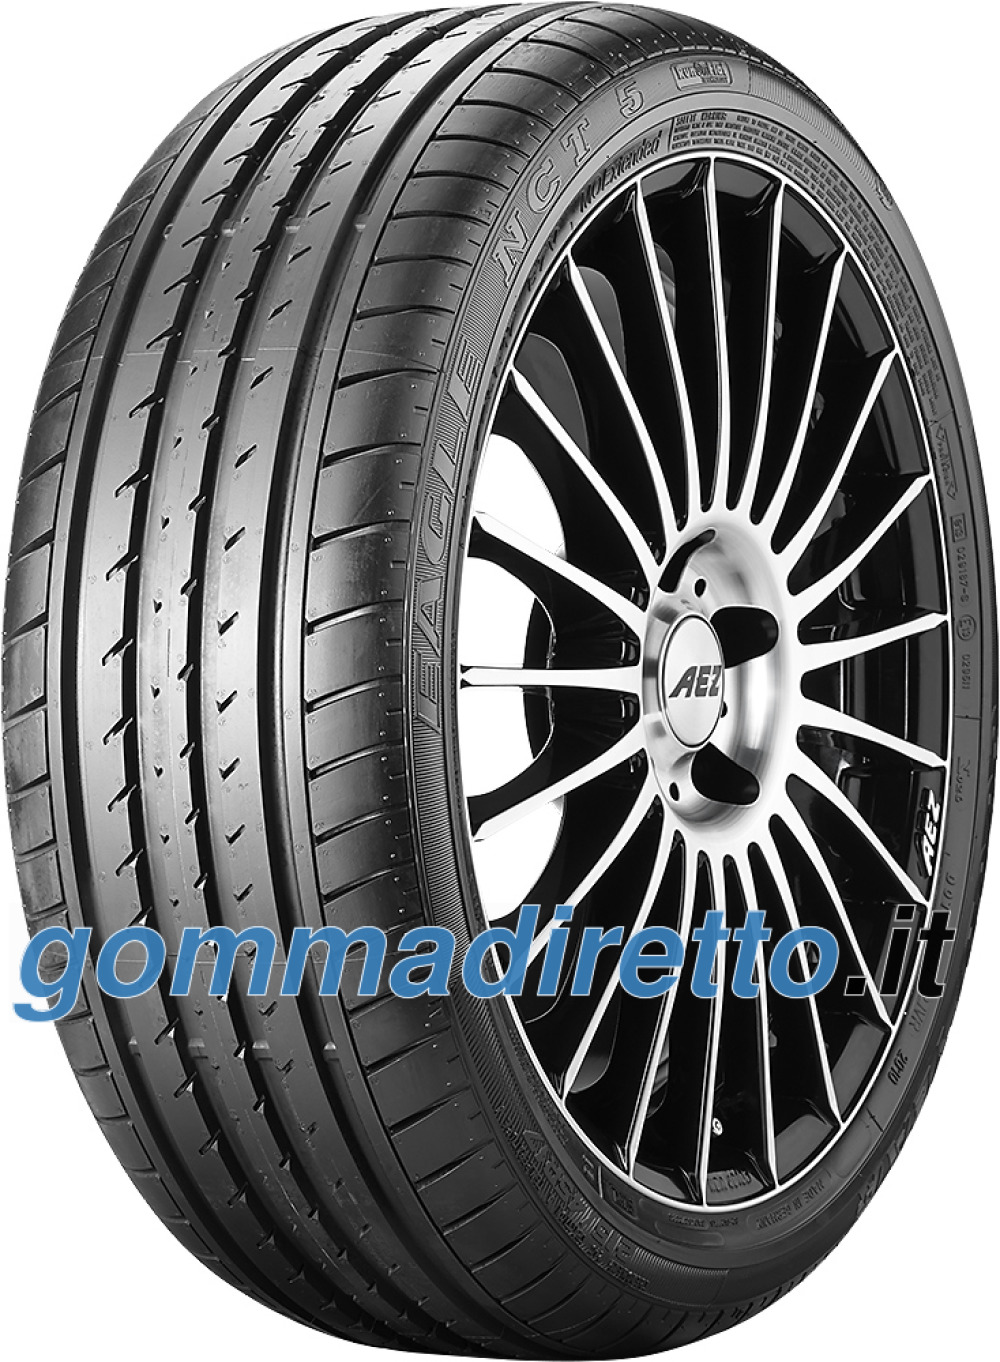 Image of Goodyear Eagle NCT 5 ROF ( 245/40 R18 93Y *, runflat )